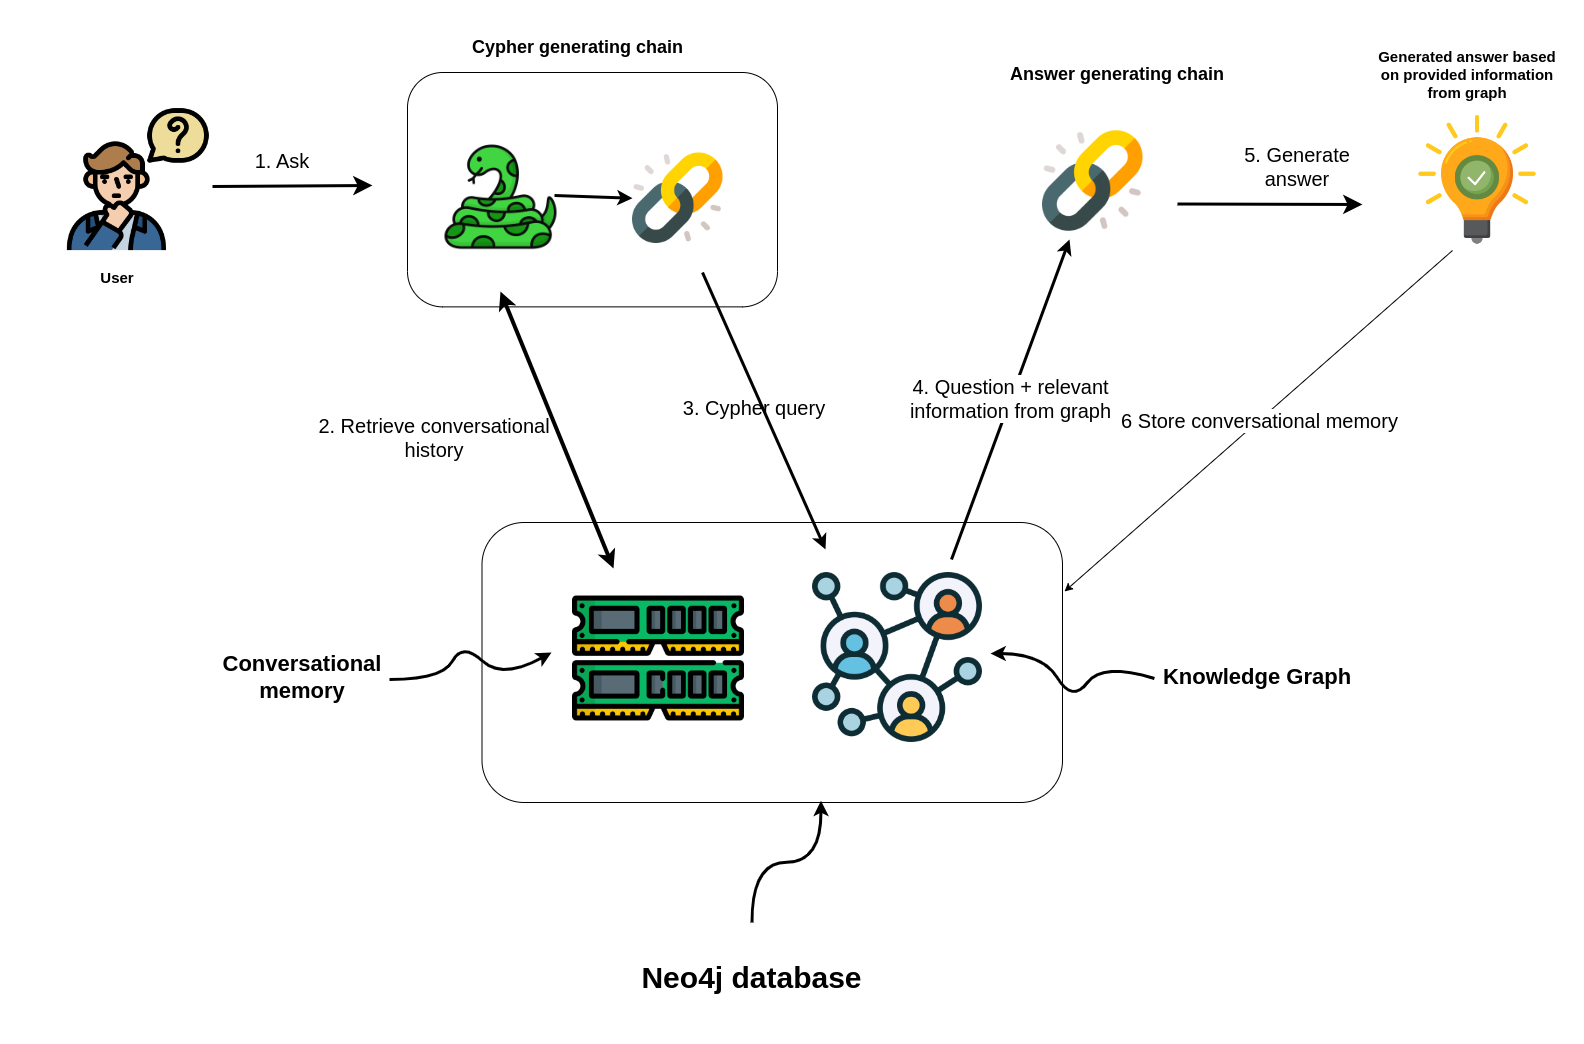 Workflow diagram illustrating the process of a user asking a question, generating a Cypher query, retrieving conversational history, executing the query on a Neo4j database, generating an answer, and storing conversational memory.